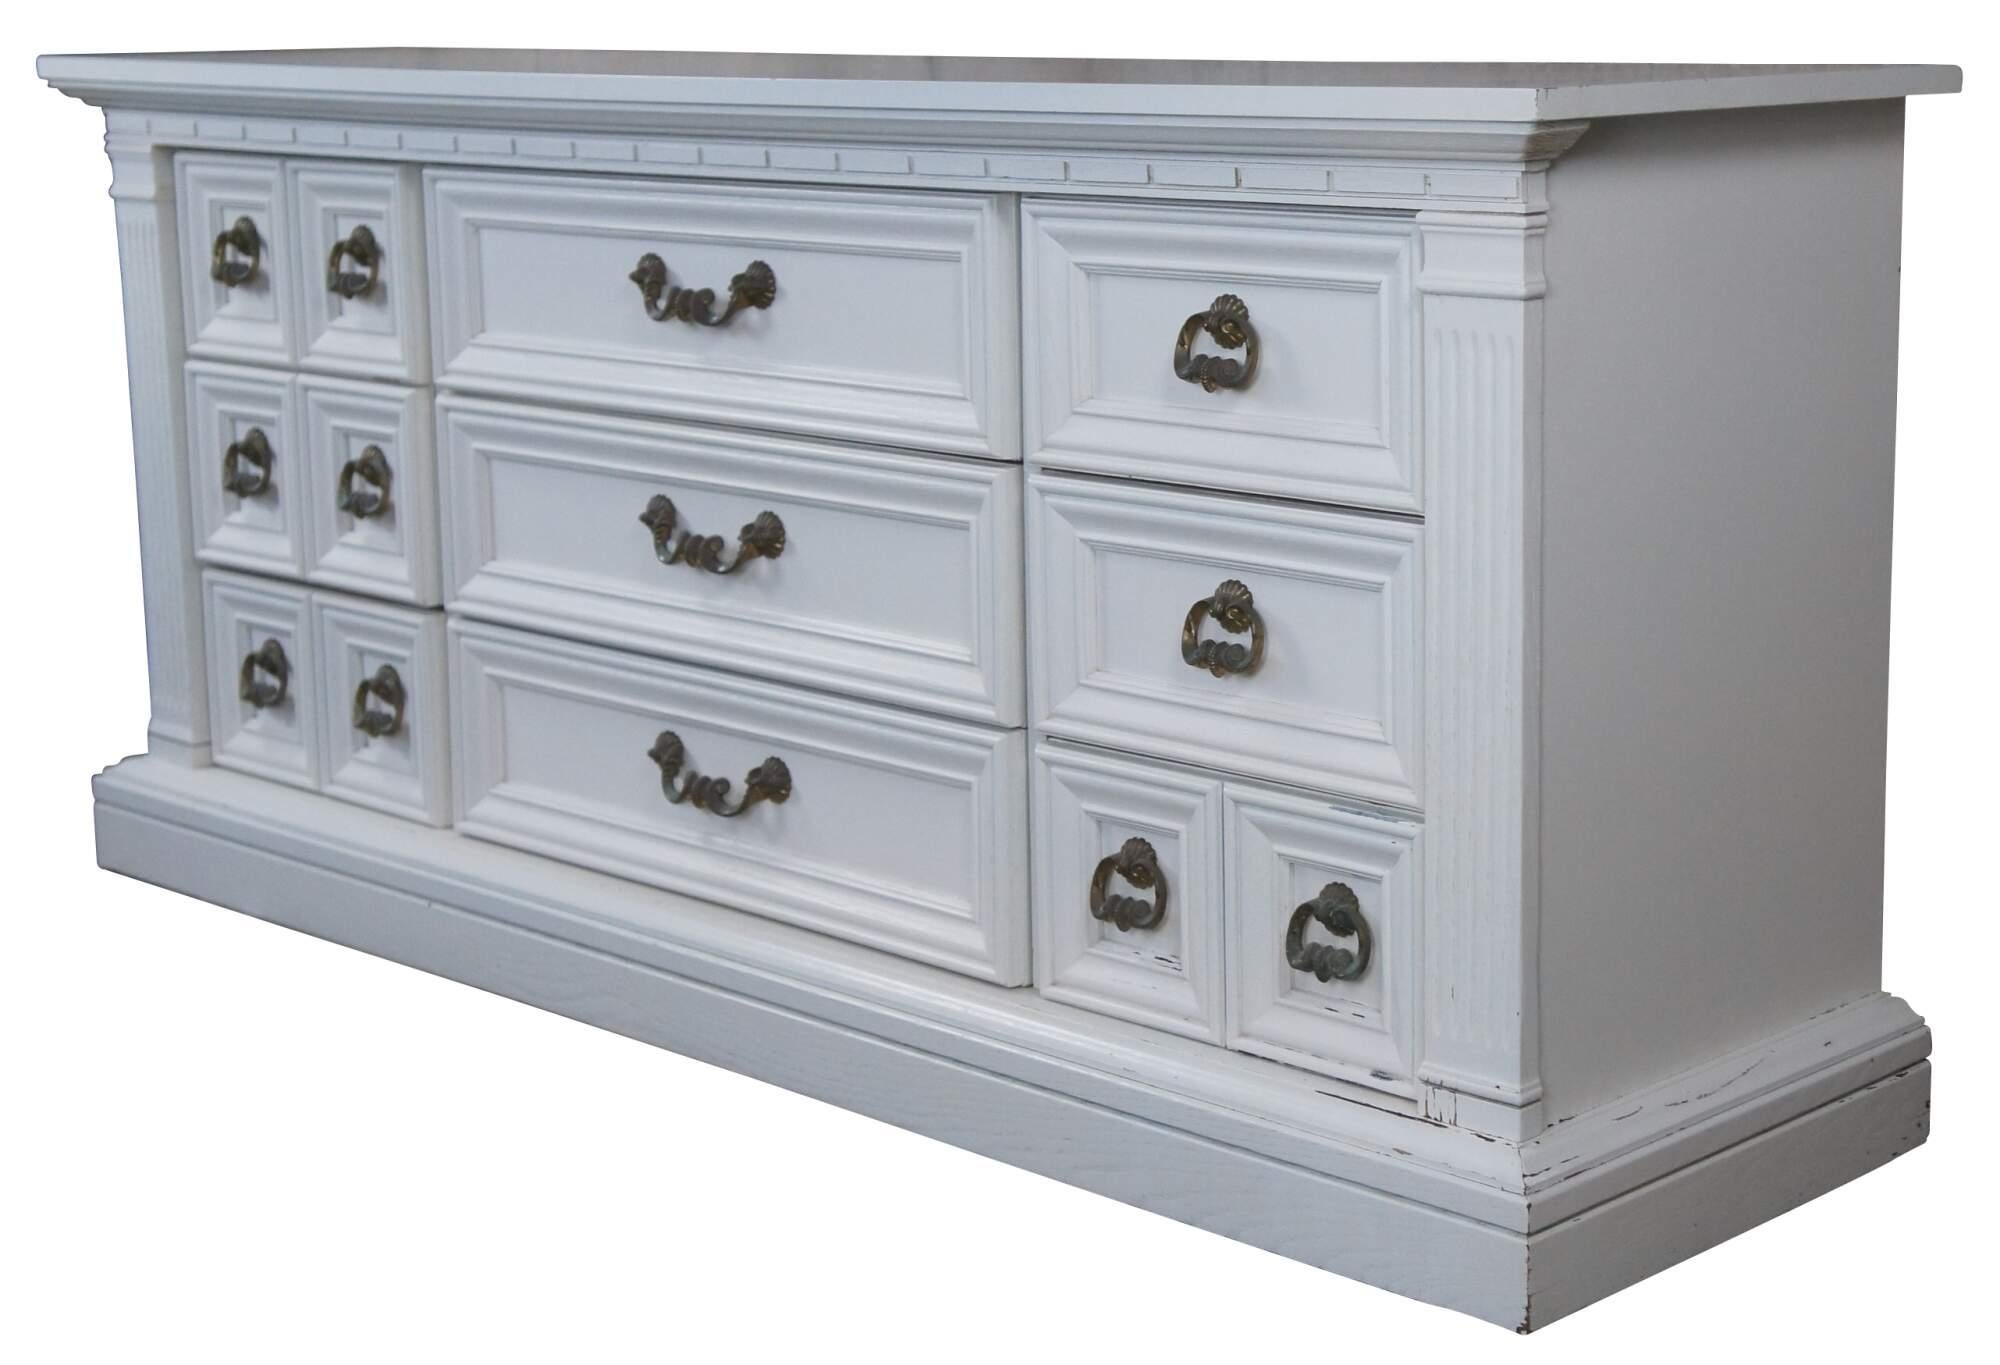 Italian Mediterranean style painted dresser, circa 1980s. A rectangular form made from oak with 9 drawers drawers. Features corinthian style columns along the outside and ornate hardware. Attributed to Drexel. Size: 70